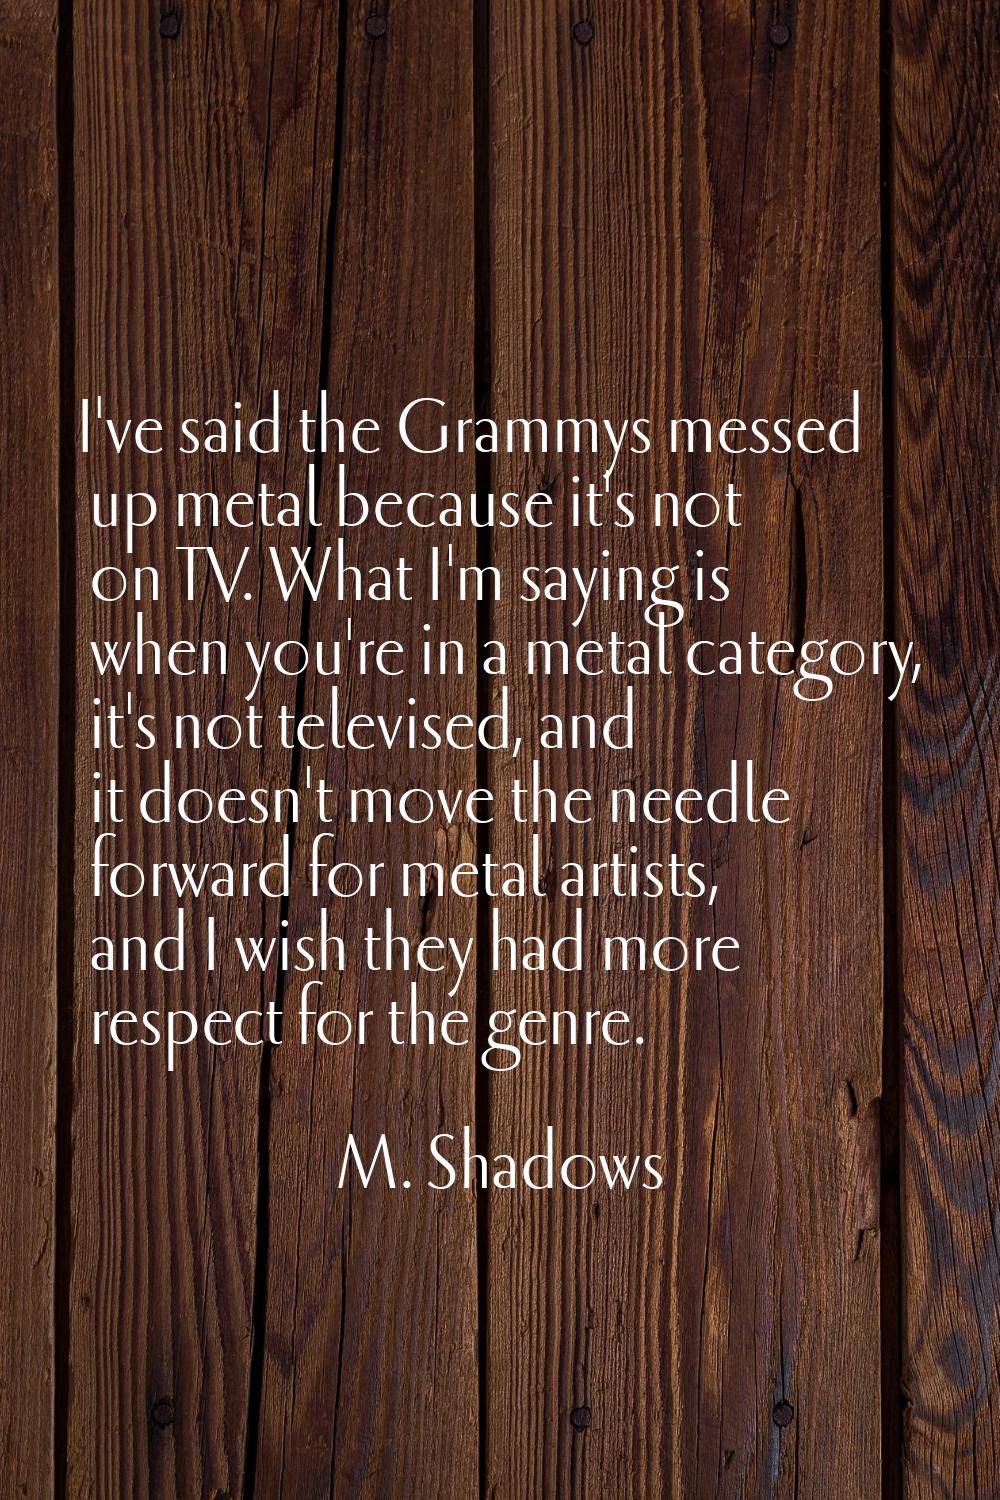 I've said the Grammys messed up metal because it's not on TV. What I'm saying is when you're in a m